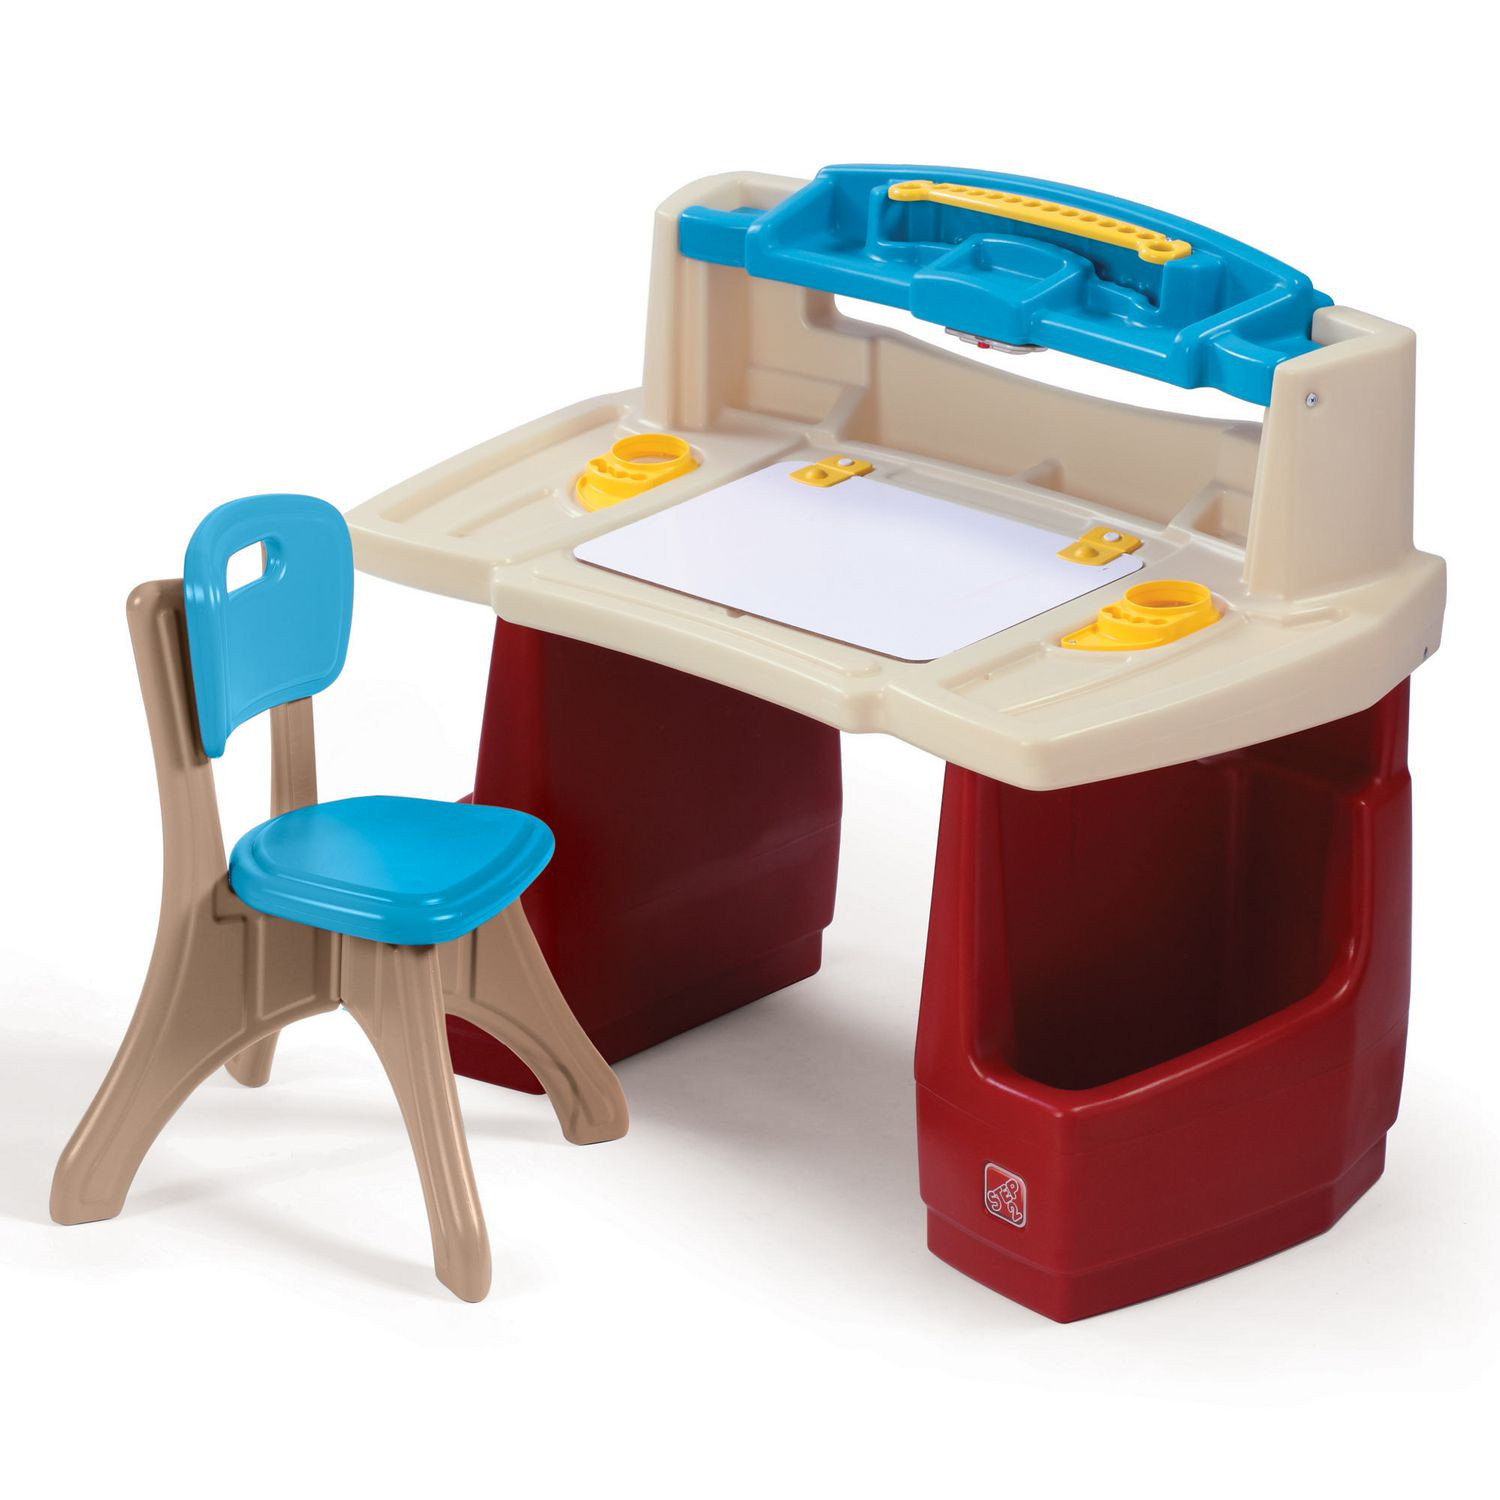 Kids Art Table With Storage
 Step2 Deluxe Art Master Desk Kids Art Table with Storage